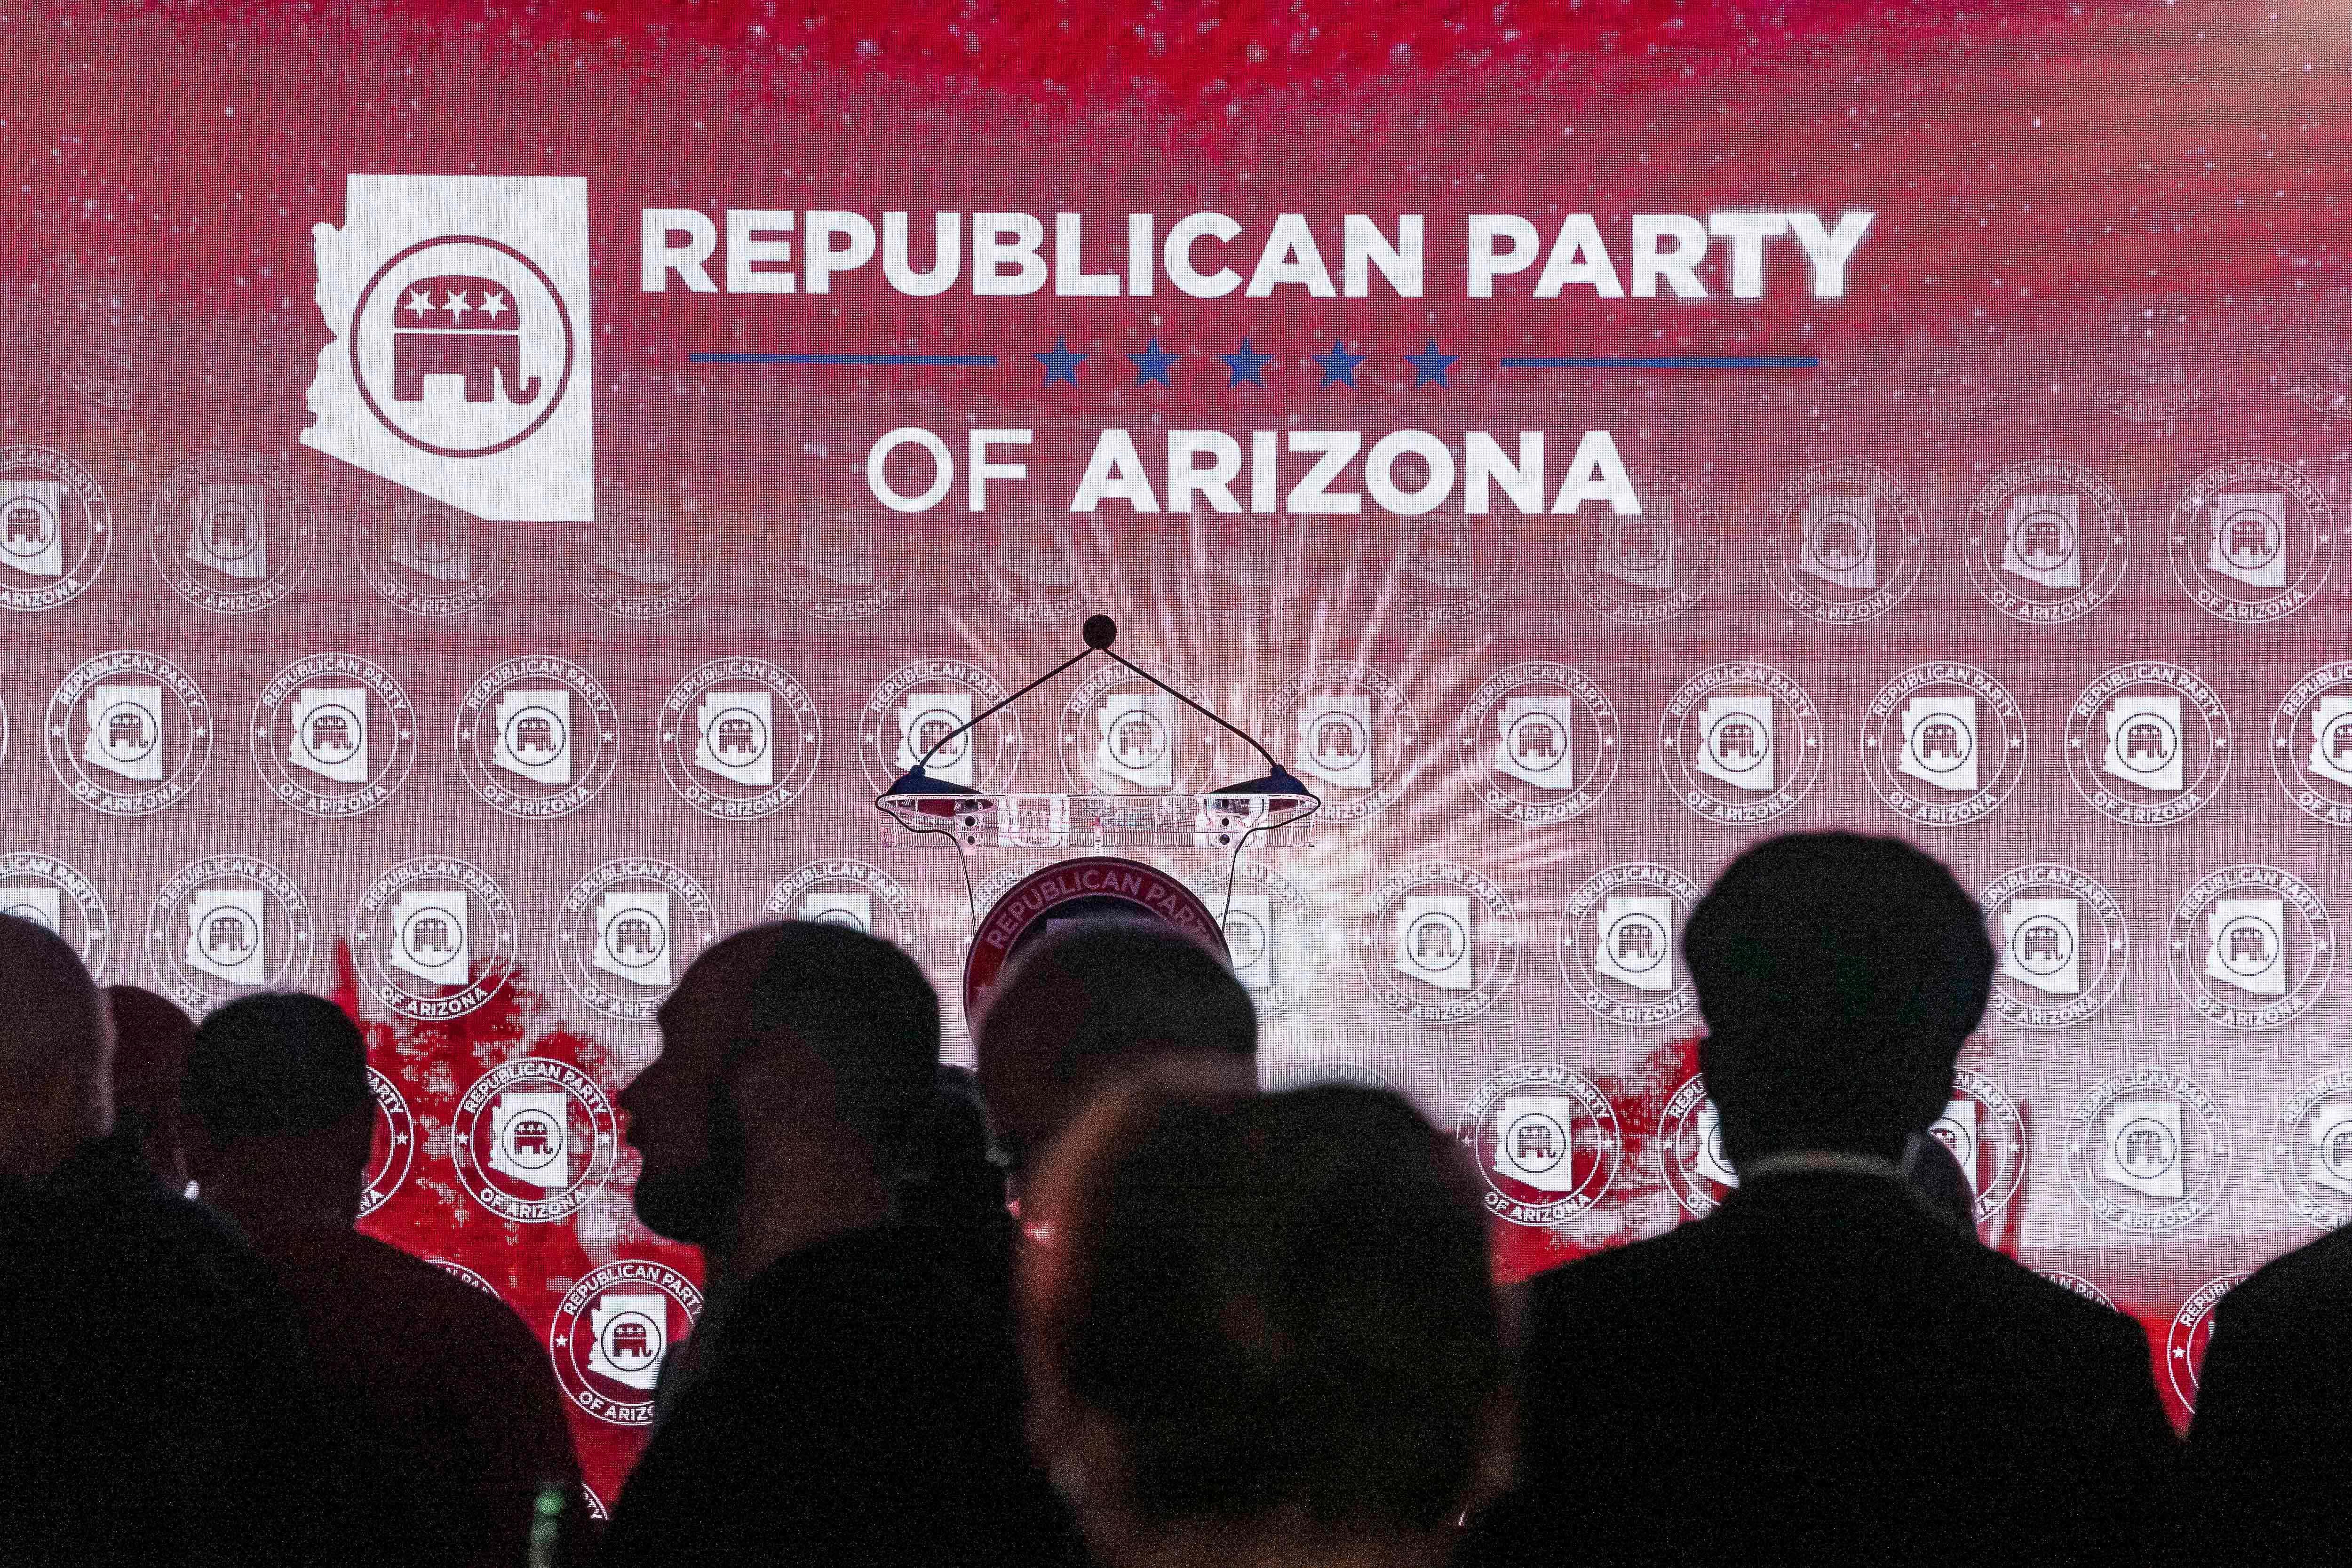 A crowd of people in a dark room in front of a banner reading "Republican Party of Arizona"